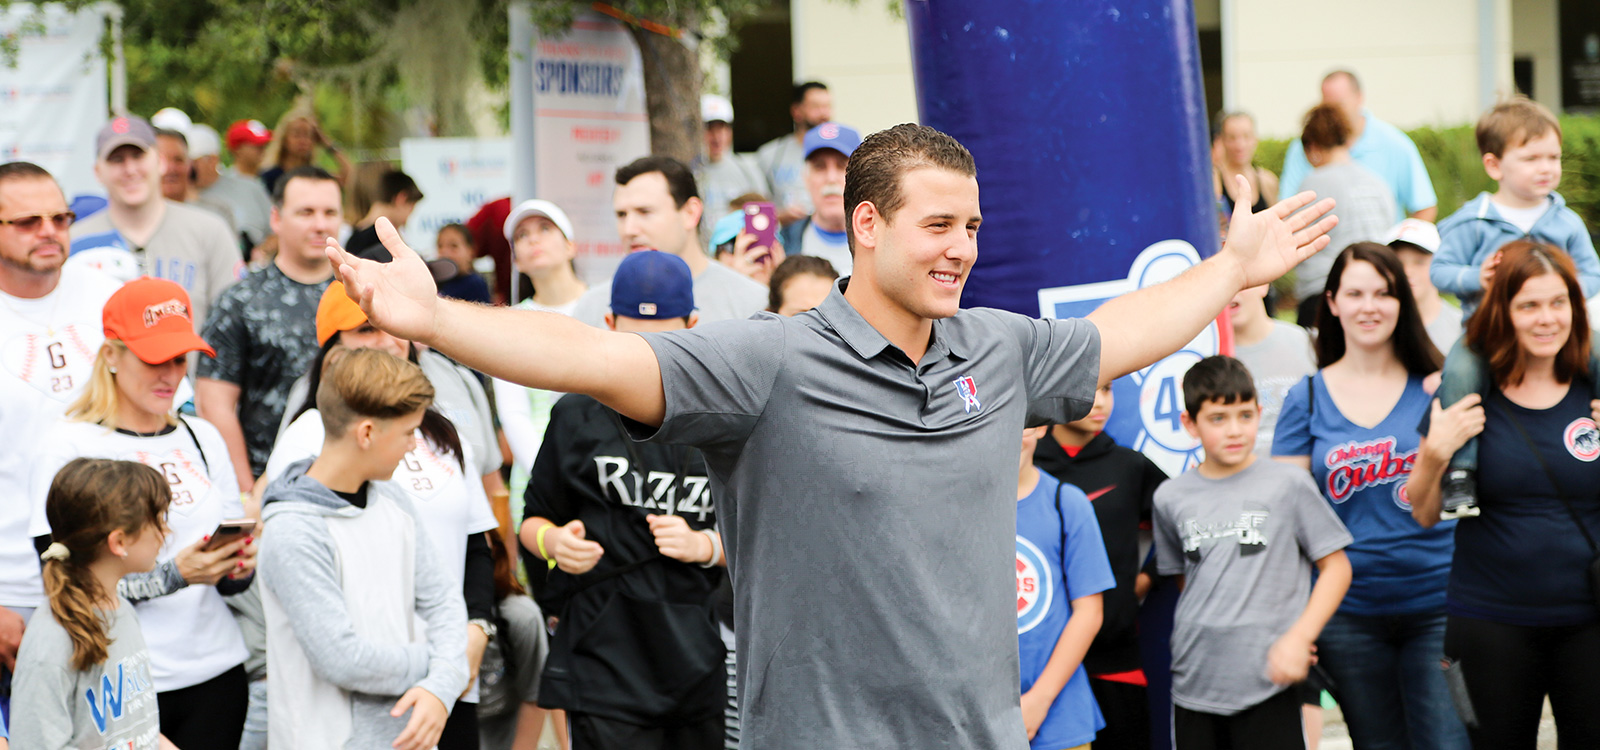 Anthony Rizzo Family Foundation - St. Rita Believe Band